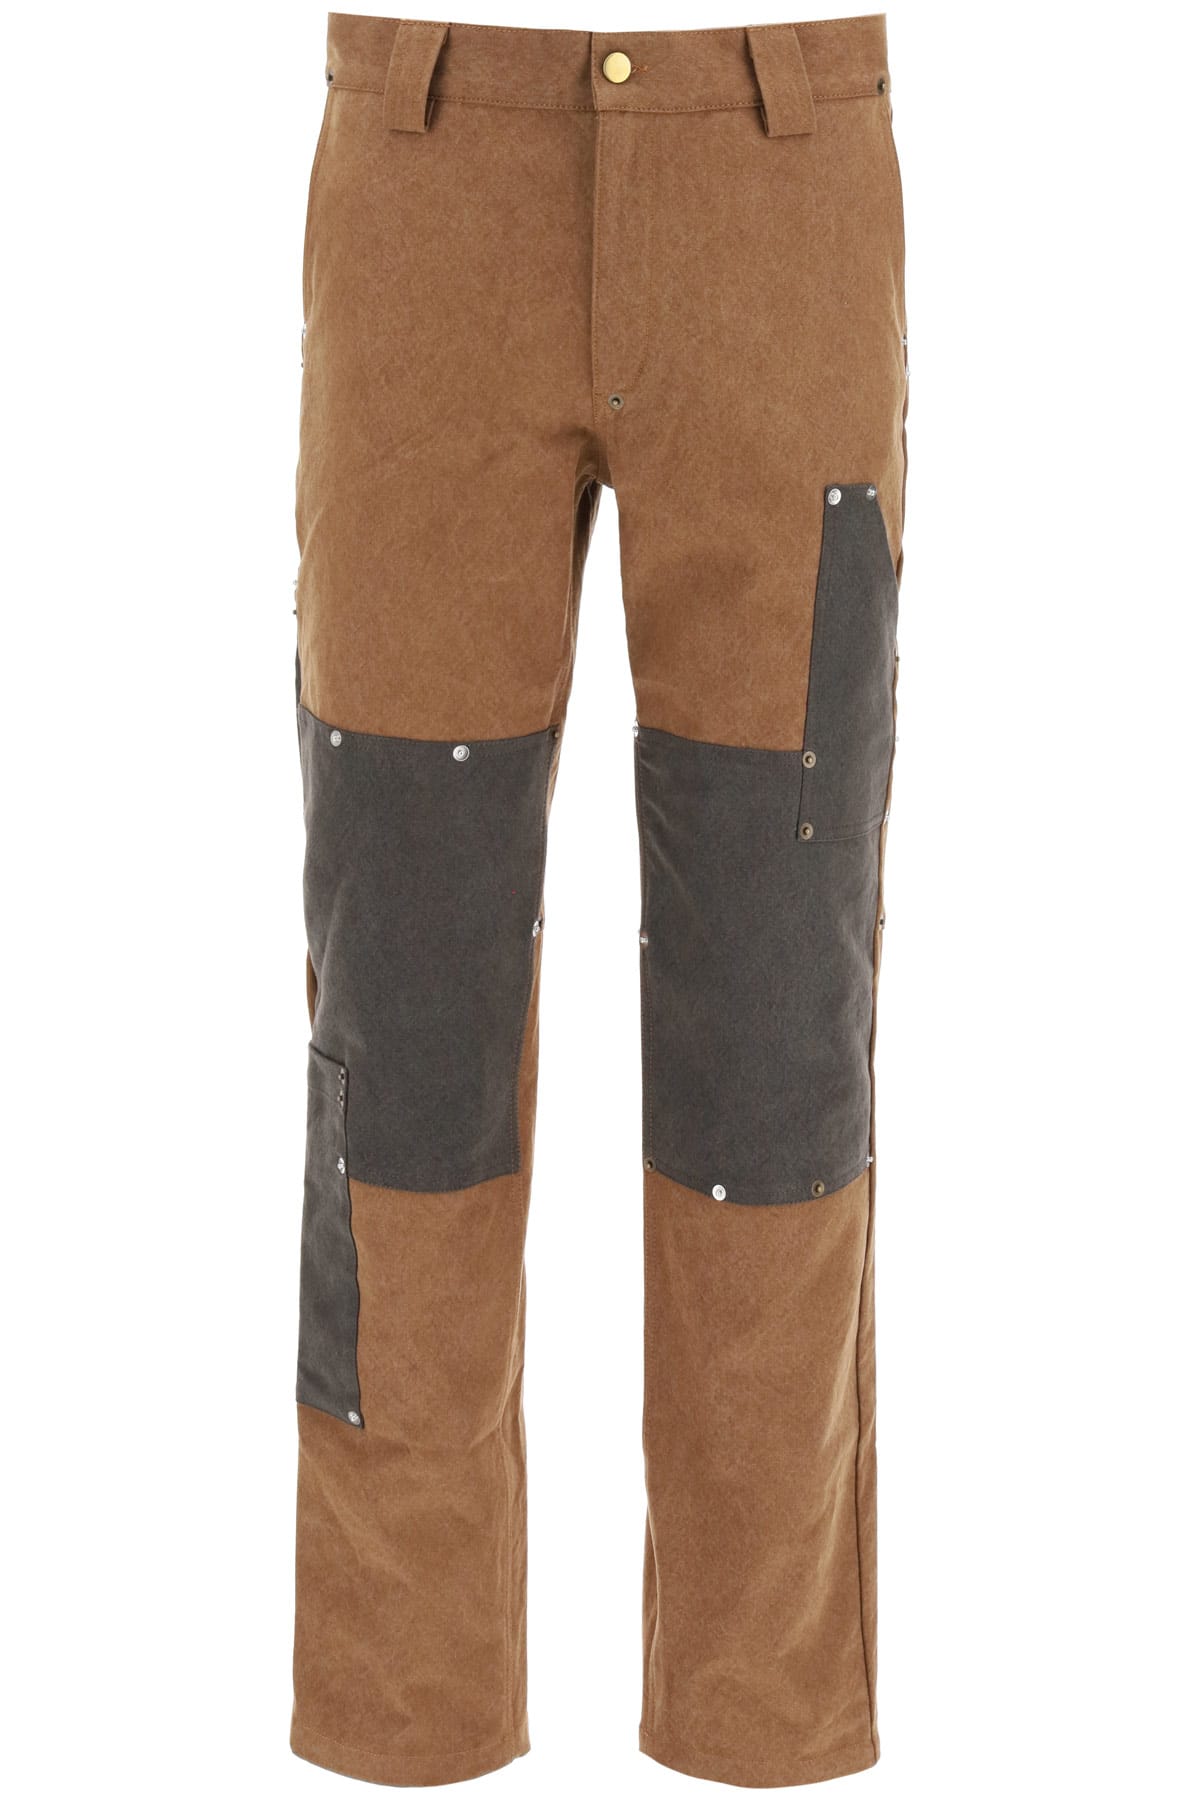 Phipps Workwear Trousers